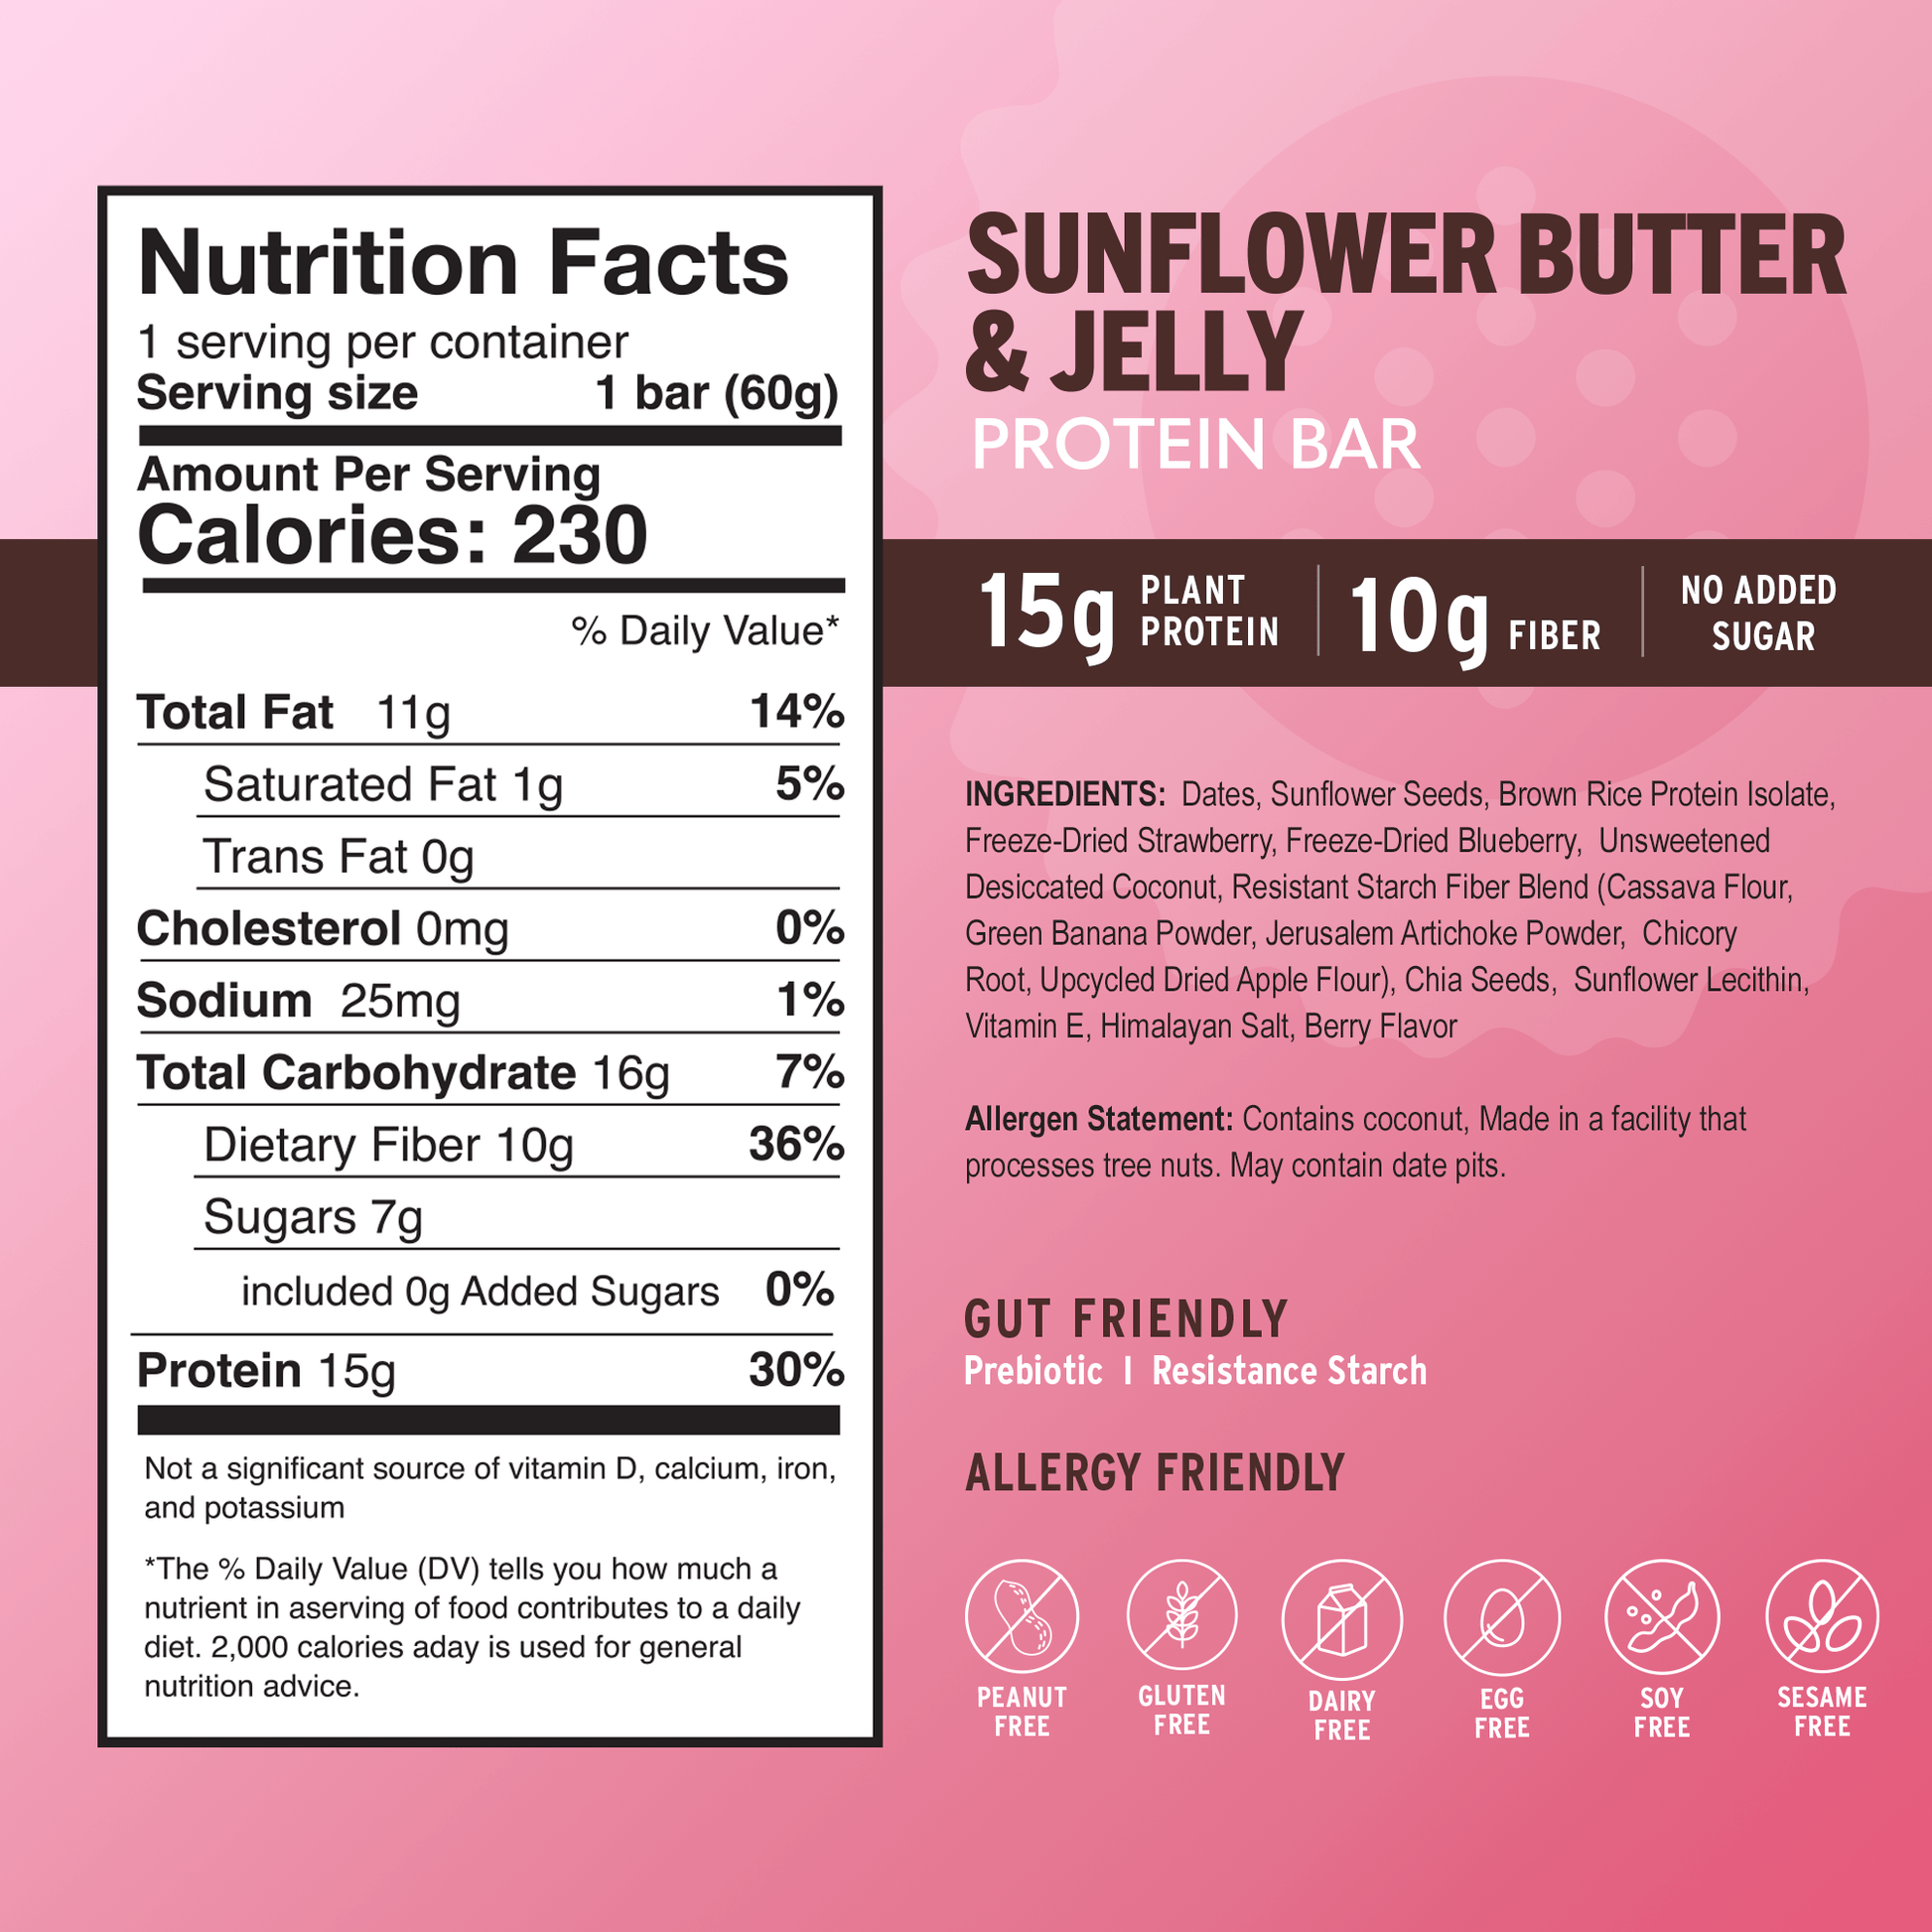 amrita-health-foods Sunflower Butter and Jelly